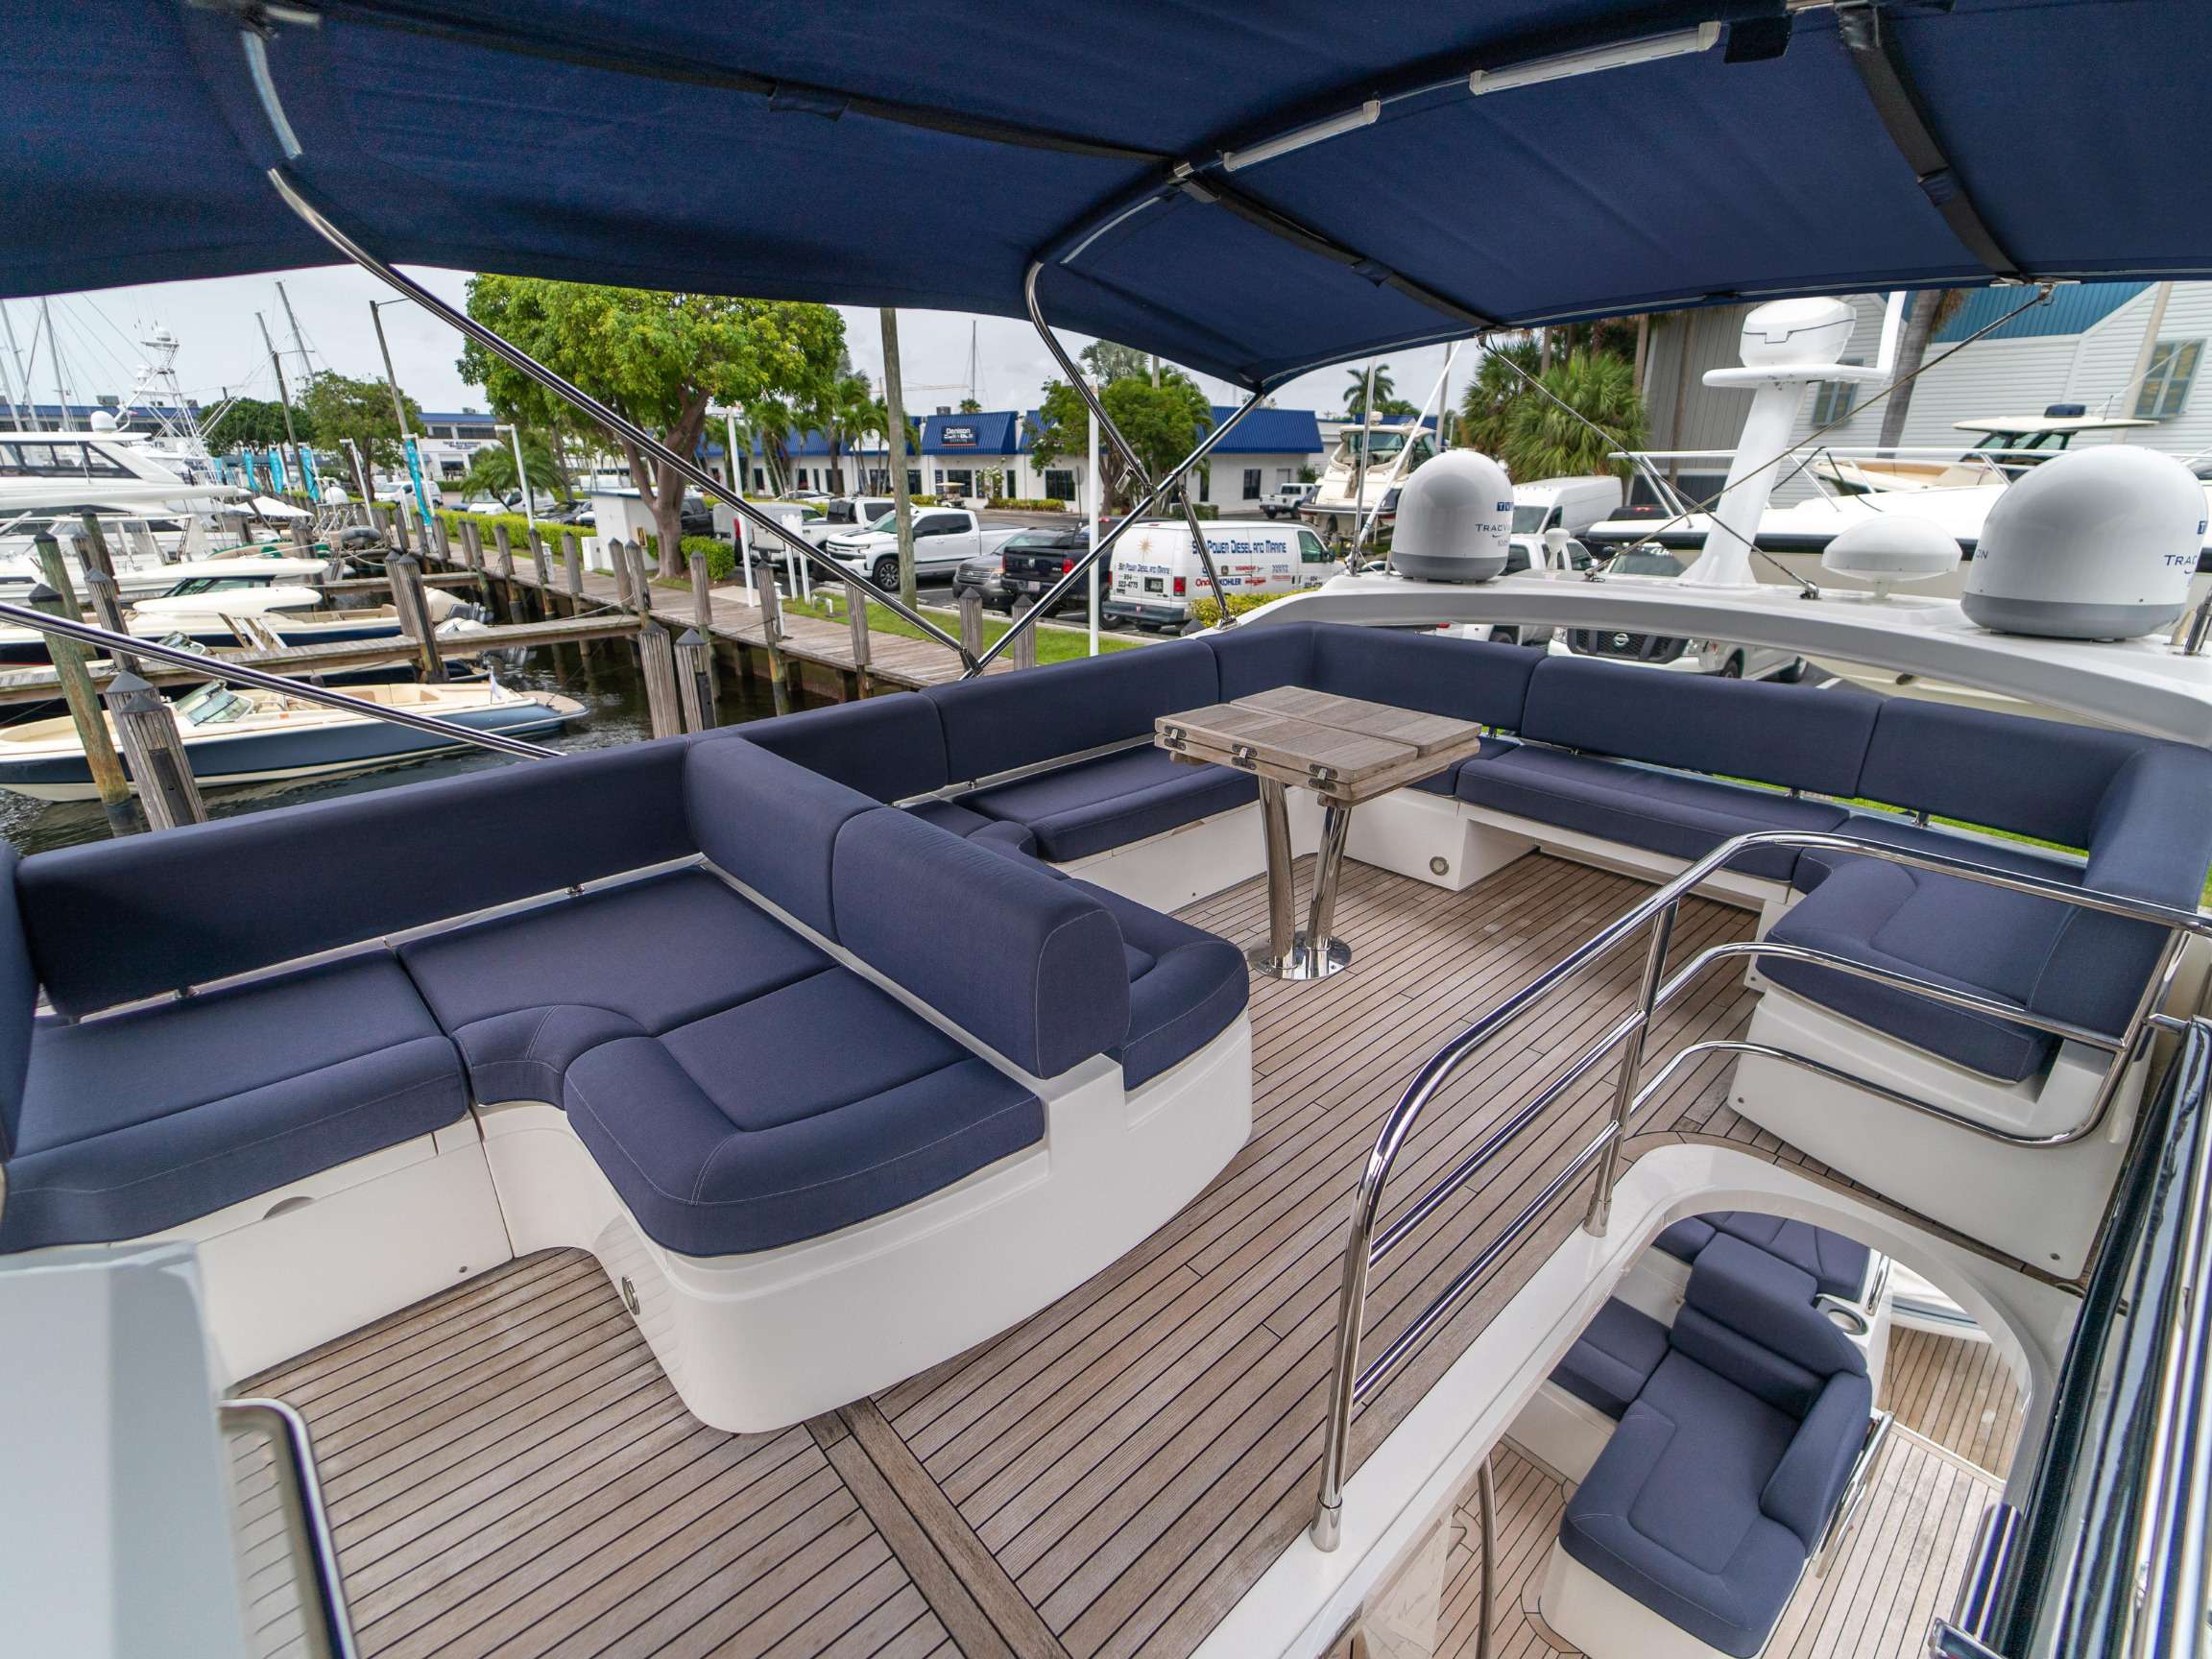 INVICTUS - Yacht Charter Annapolis & Boat hire in US East Coast & Bahamas 4